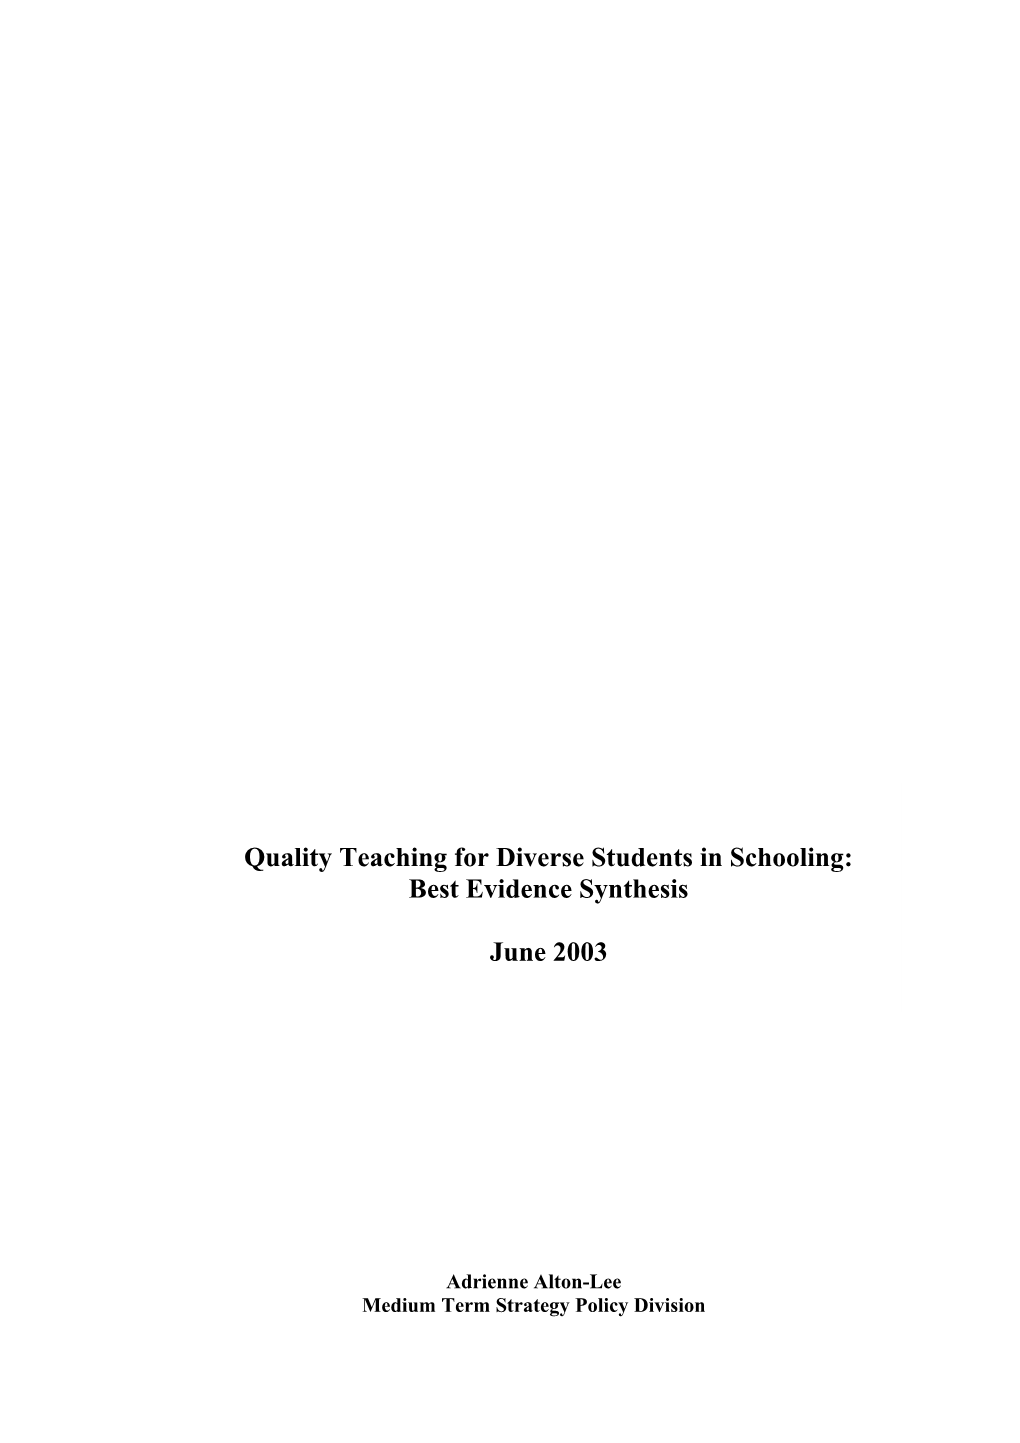 Quality Teaching for Diverse Students in Schooling BES